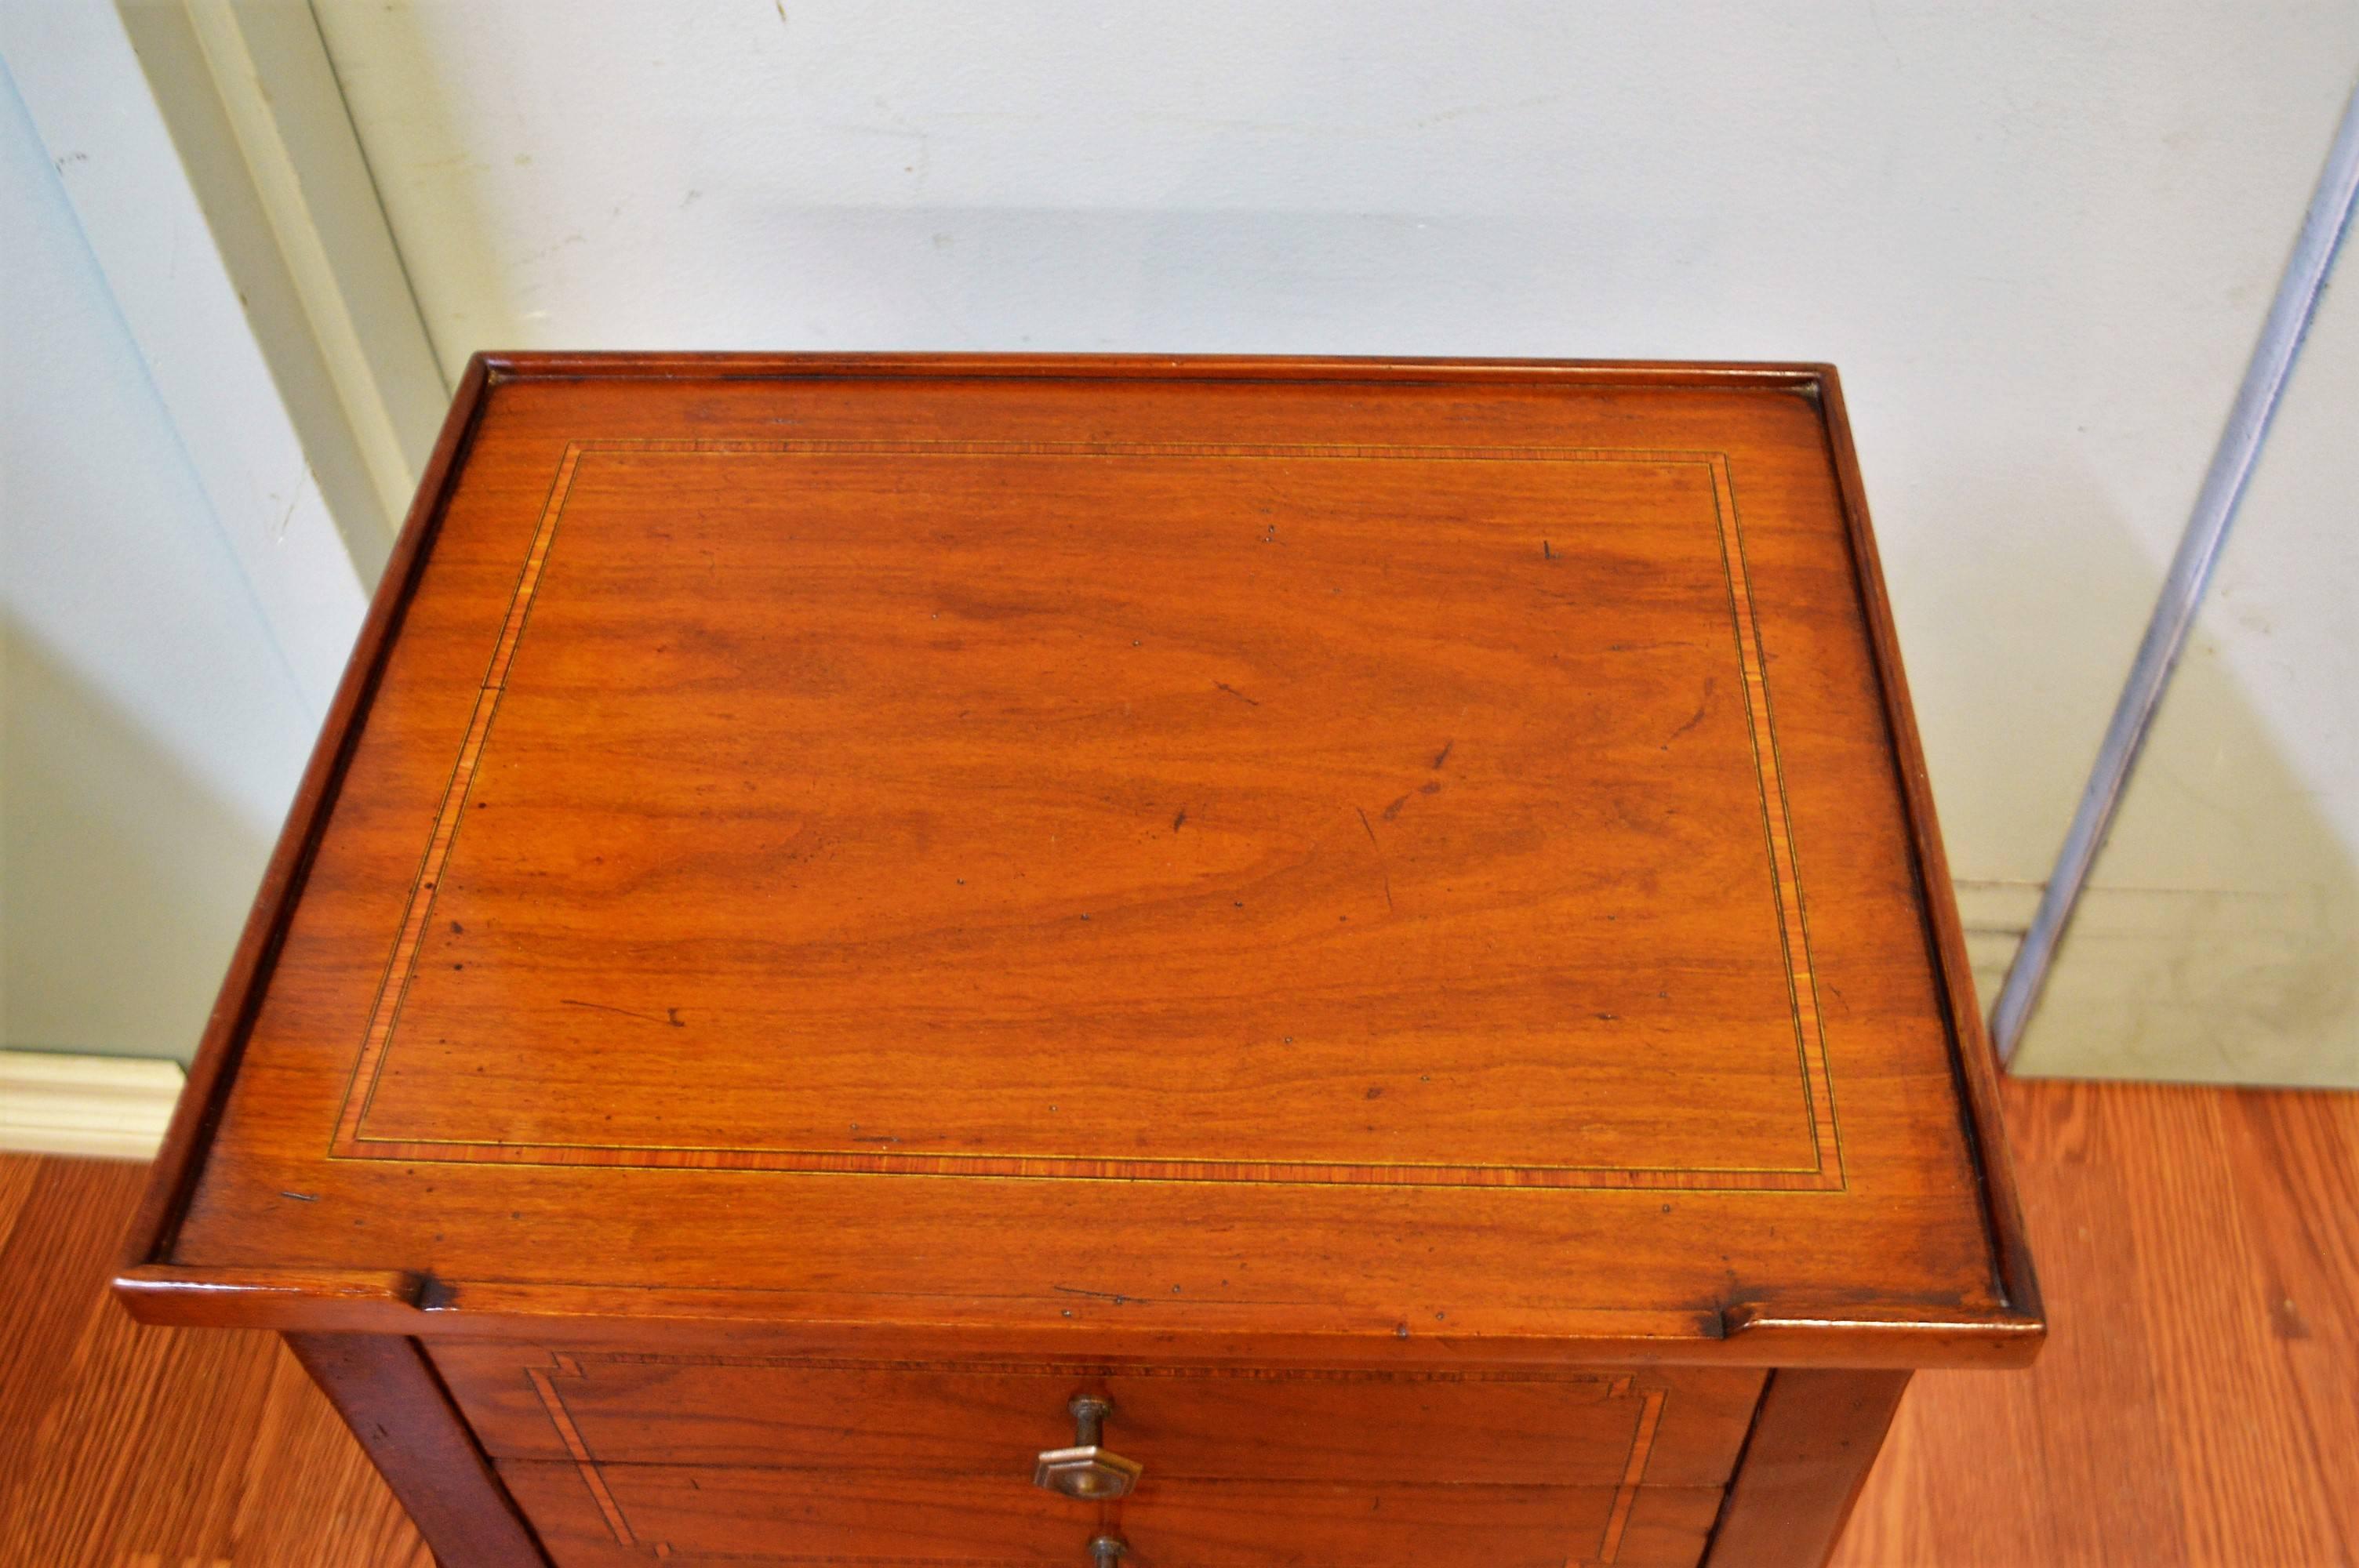 Louis XVI style mahogany side table, with inlay pattern on the top and front of the two drawers. it also has a practical lower shelf.
Will enhance any decor, great for night table.